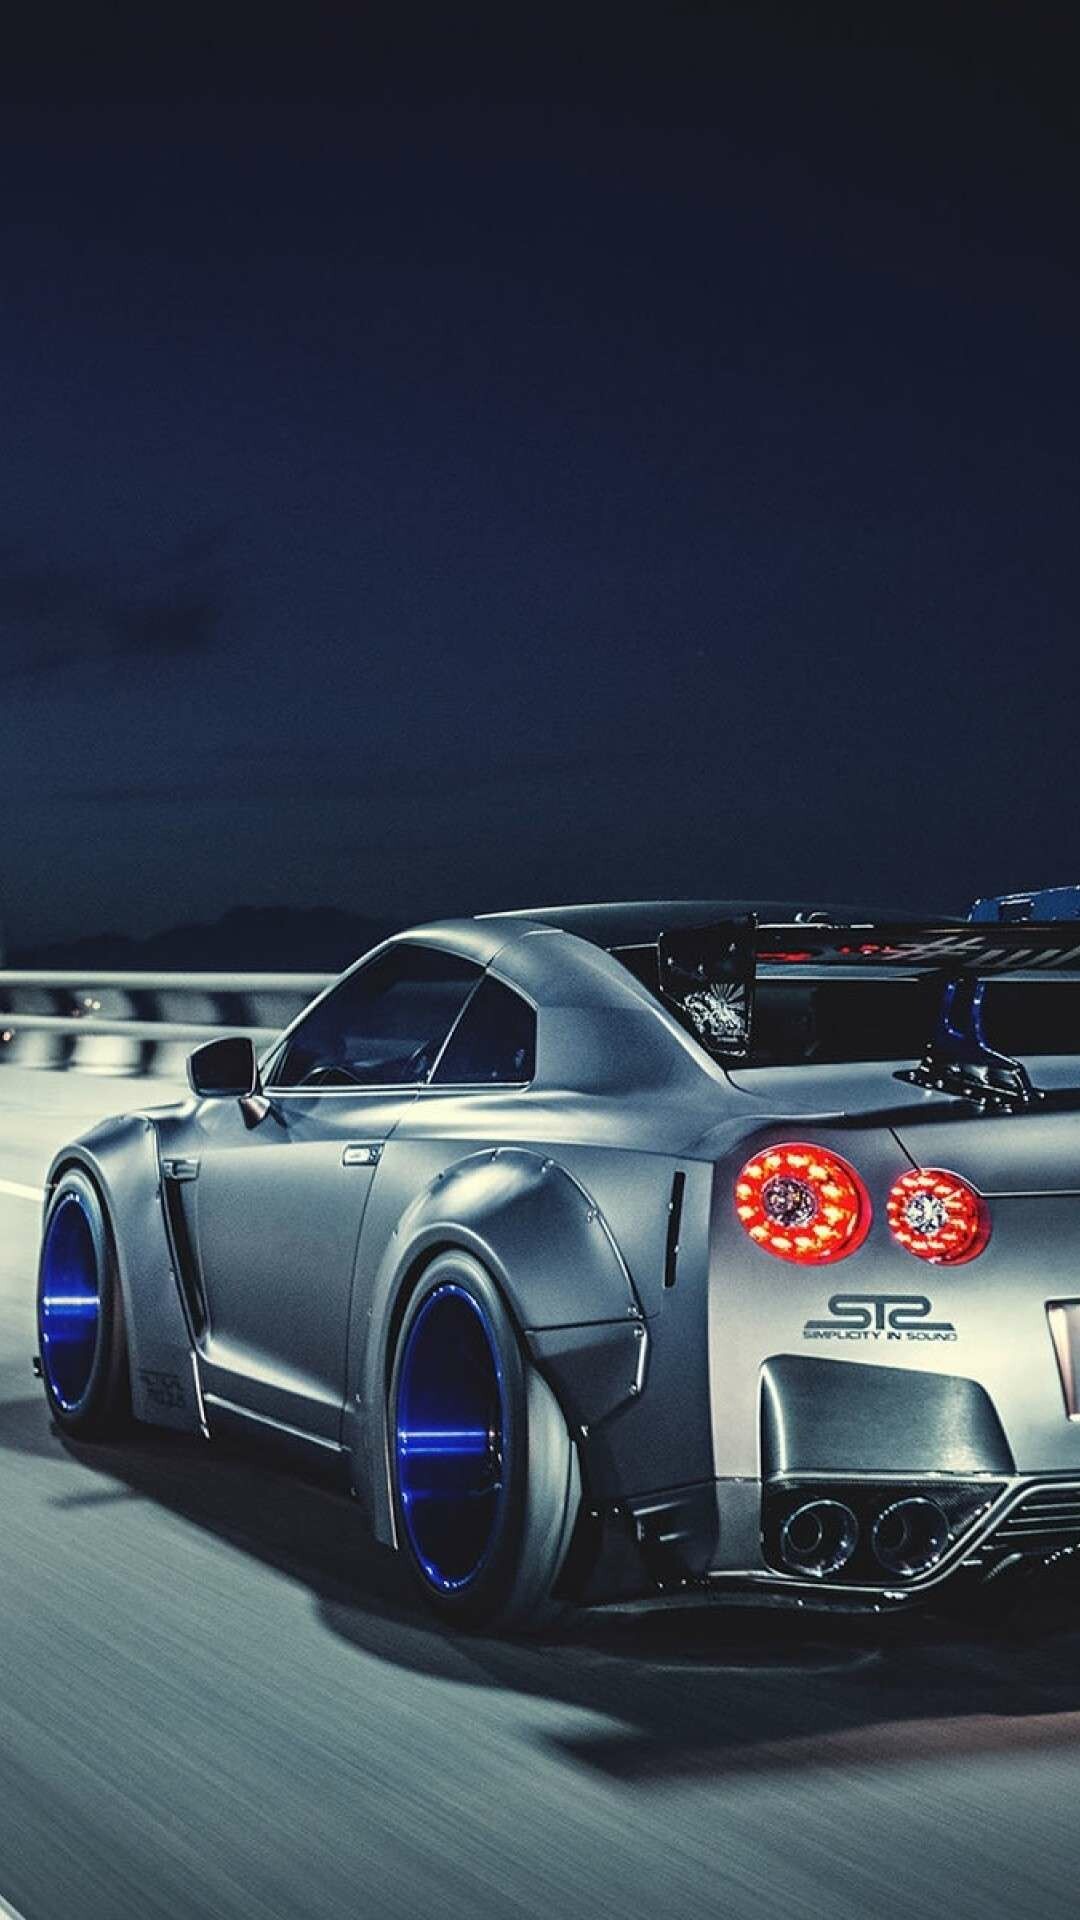 Nissan: A renowned Japanese brand, Skyline GTR. 1080x1920 Full HD Background.